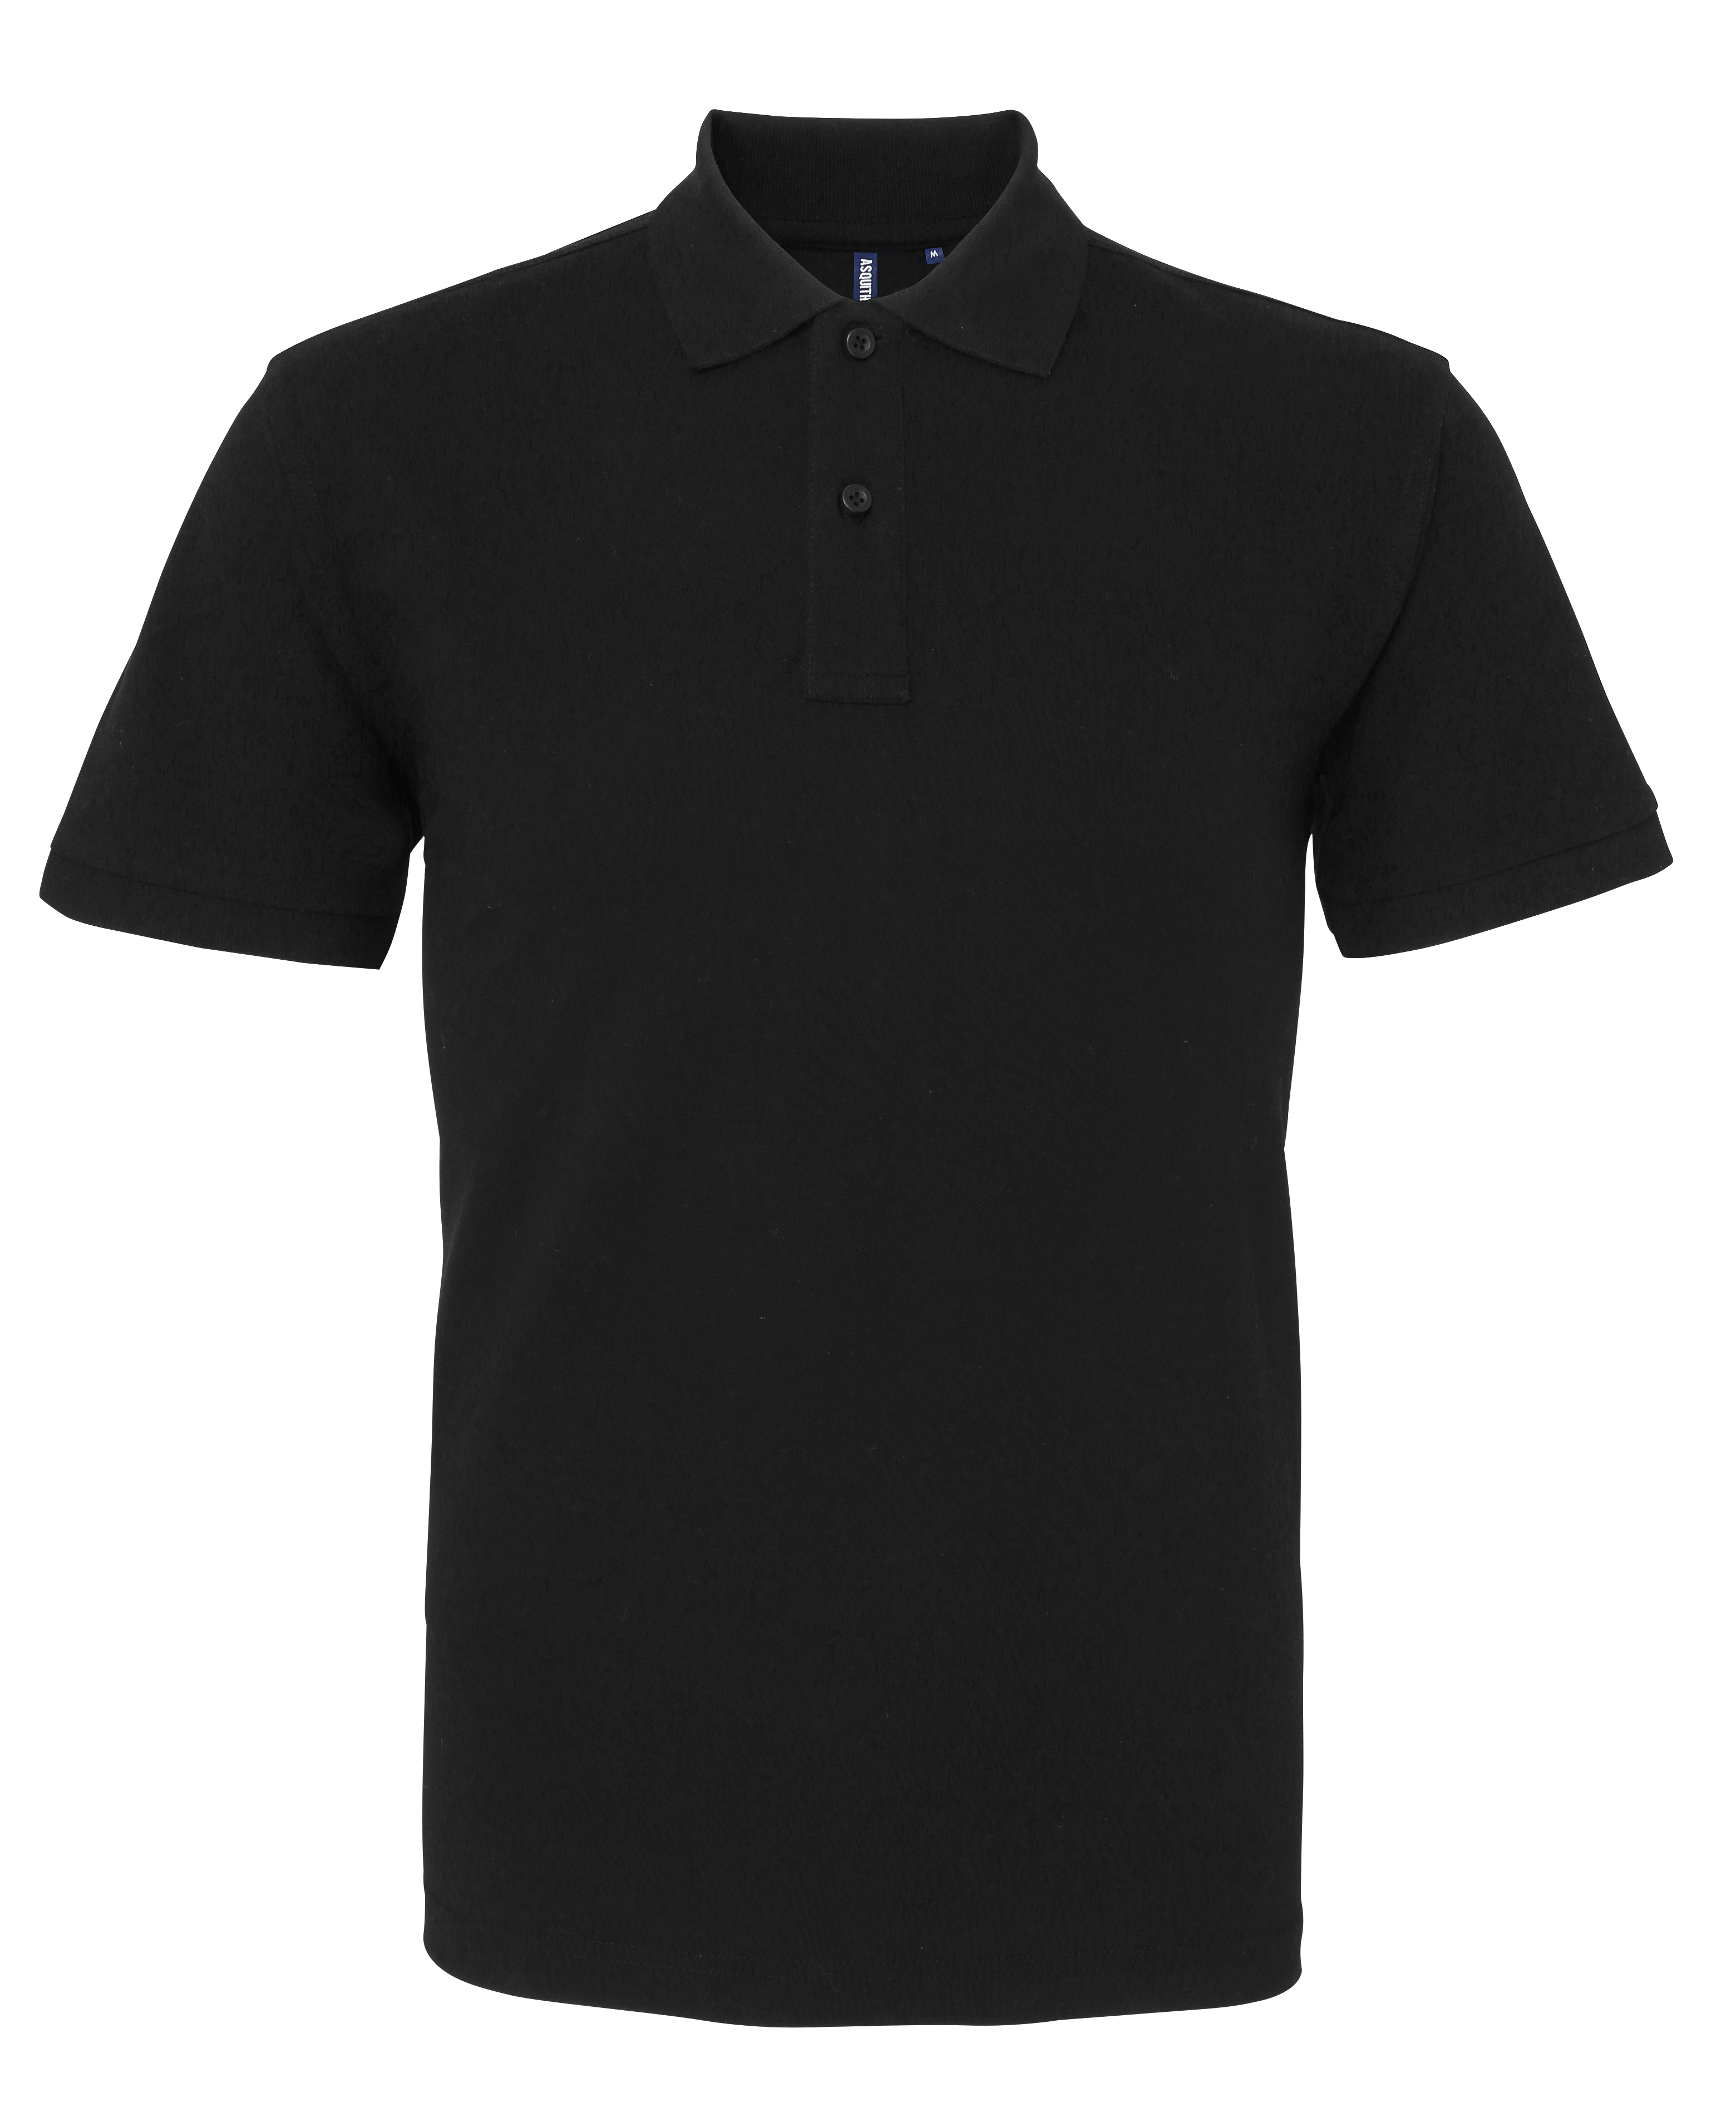 ax-httpswebsystems.s3.amazonaws.comtmp_for_downloadasquith-and-fox-men27s-polo-black.jpg